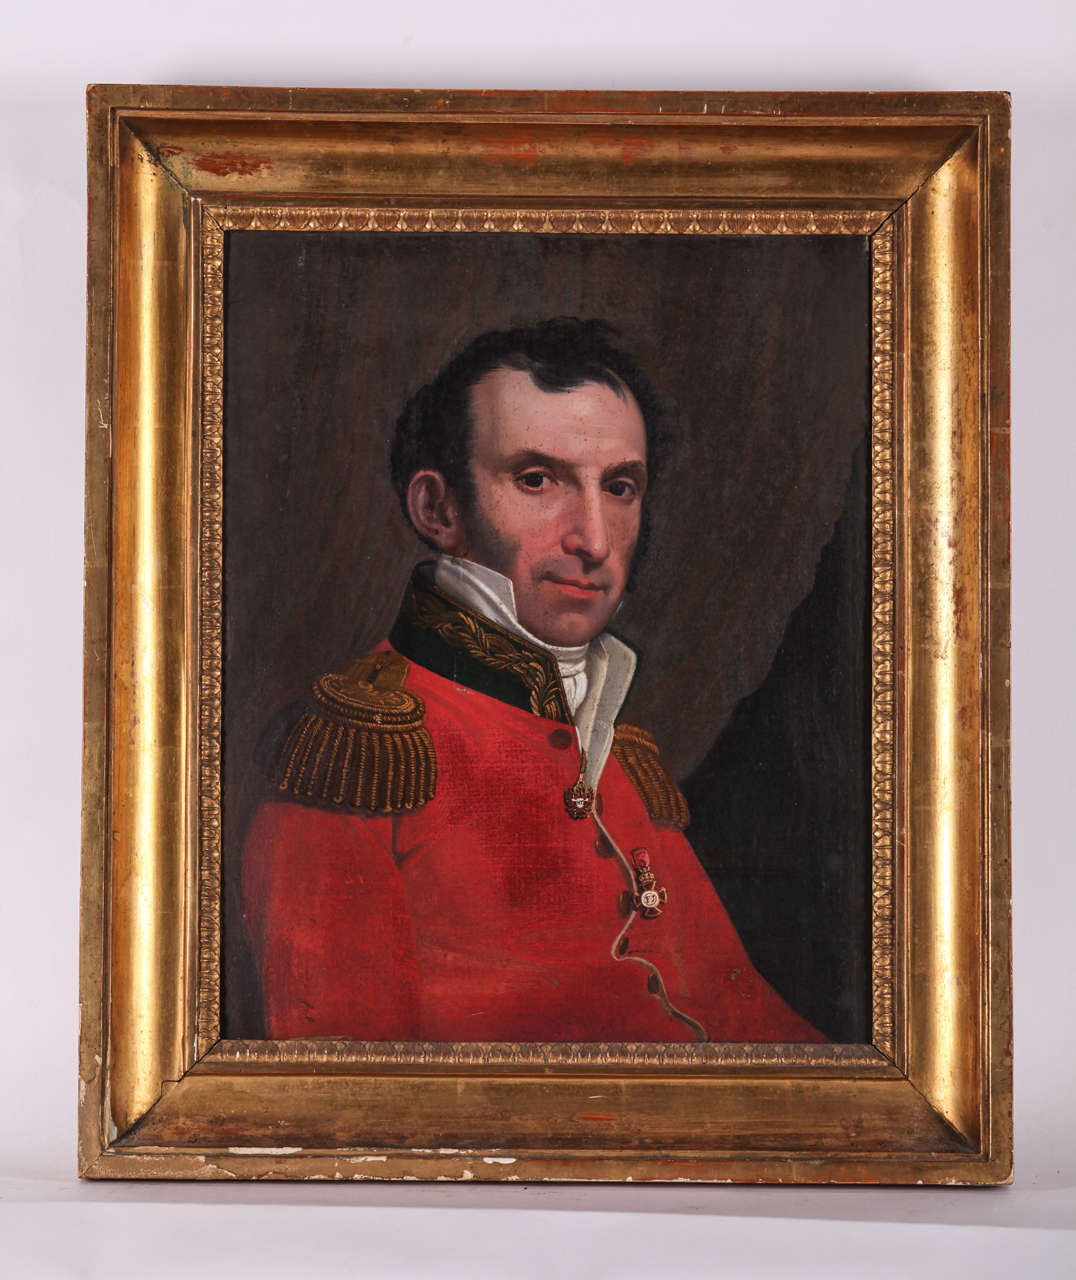 Painted British painter, Portrait of British soldier, oil on canvas, early 19th Century